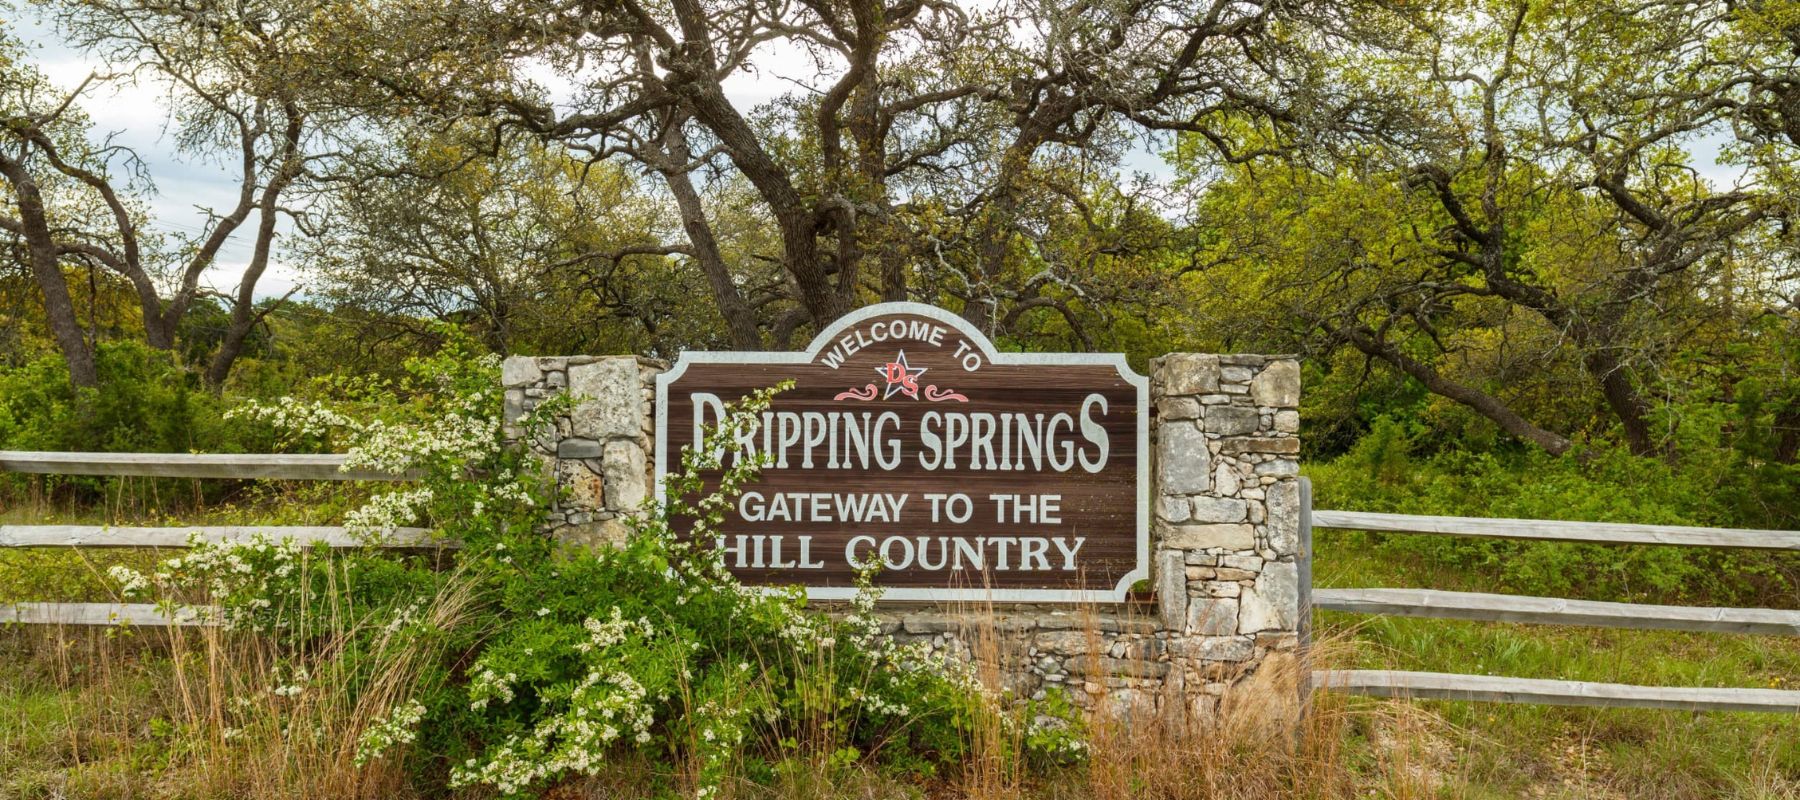 welcome to dripping springs gateway to the hill country sign positioned outside surrounded by trees